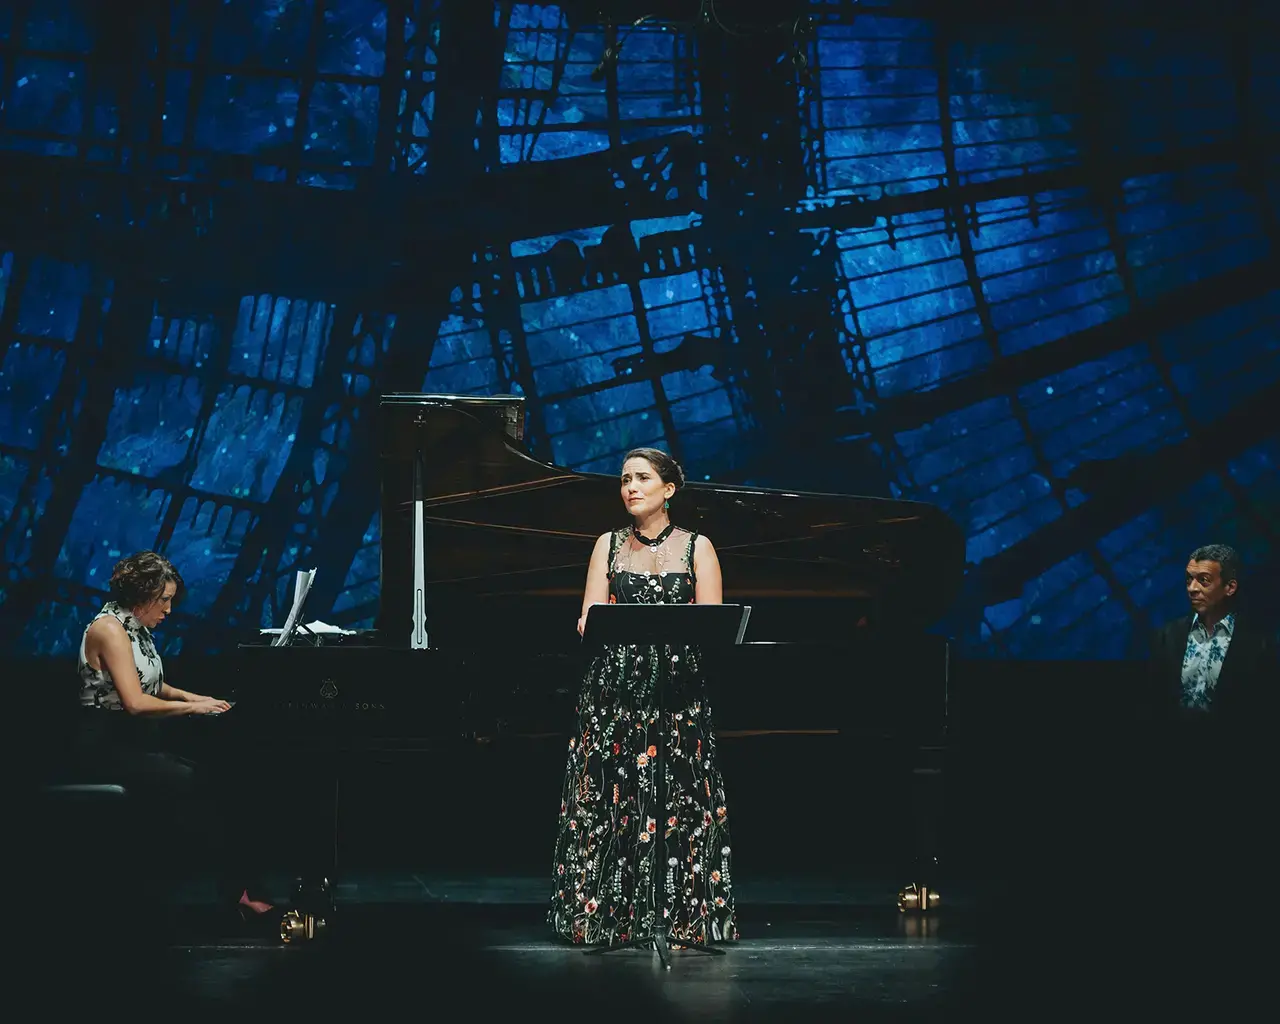 Philadelphia Chamber Music Society, Emerging Voices: Art Song &amp; Social Connection, 2019. Joelle Harvey, soprano, and Shannon McGinnis, piano, performing Reynaldo Hahn. Photo by Matt Genders.